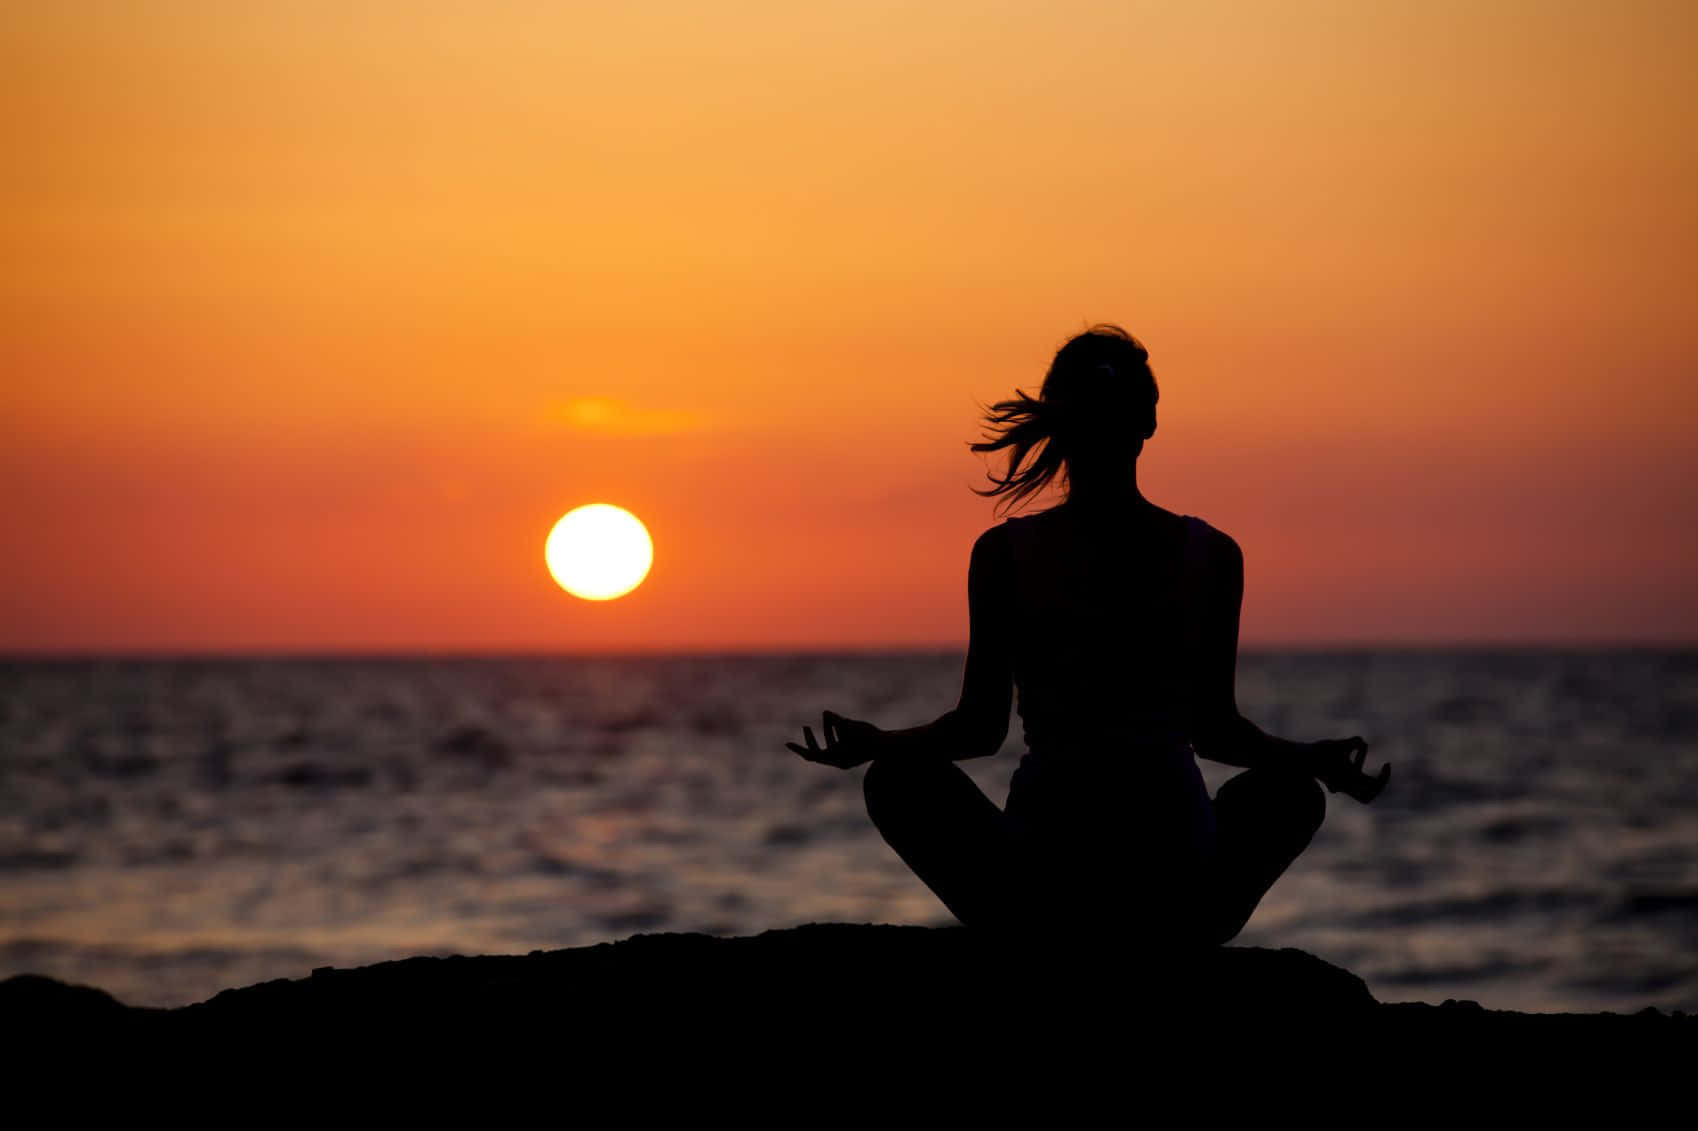 A Woman Is Meditating On The Beach At Sunset